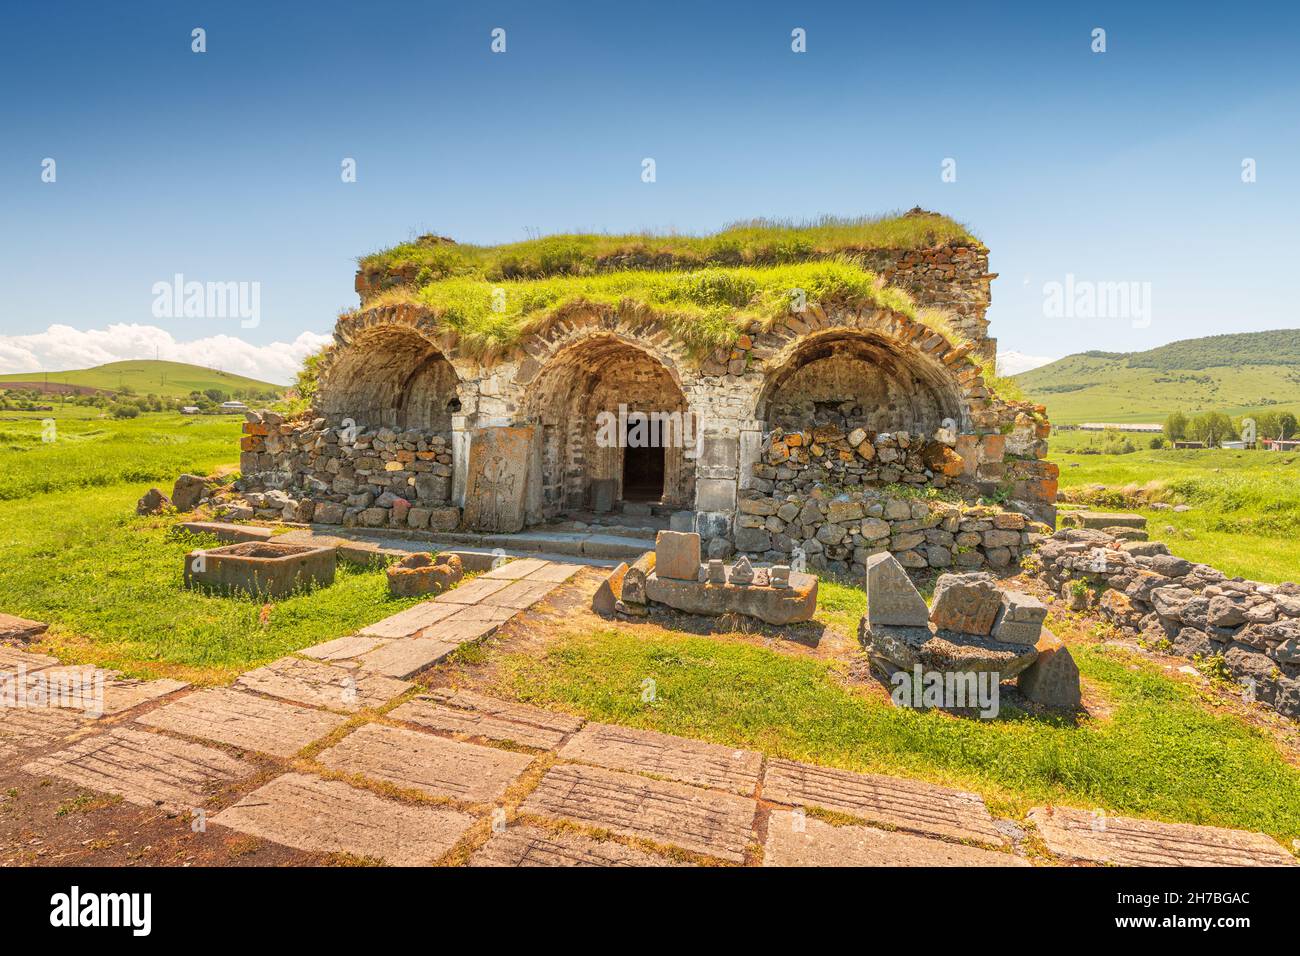 Civic house remains at the ruins of the fortress and the ancient settlement - Lori Berd. Travel and historical destinations in Armenia Stock Photo